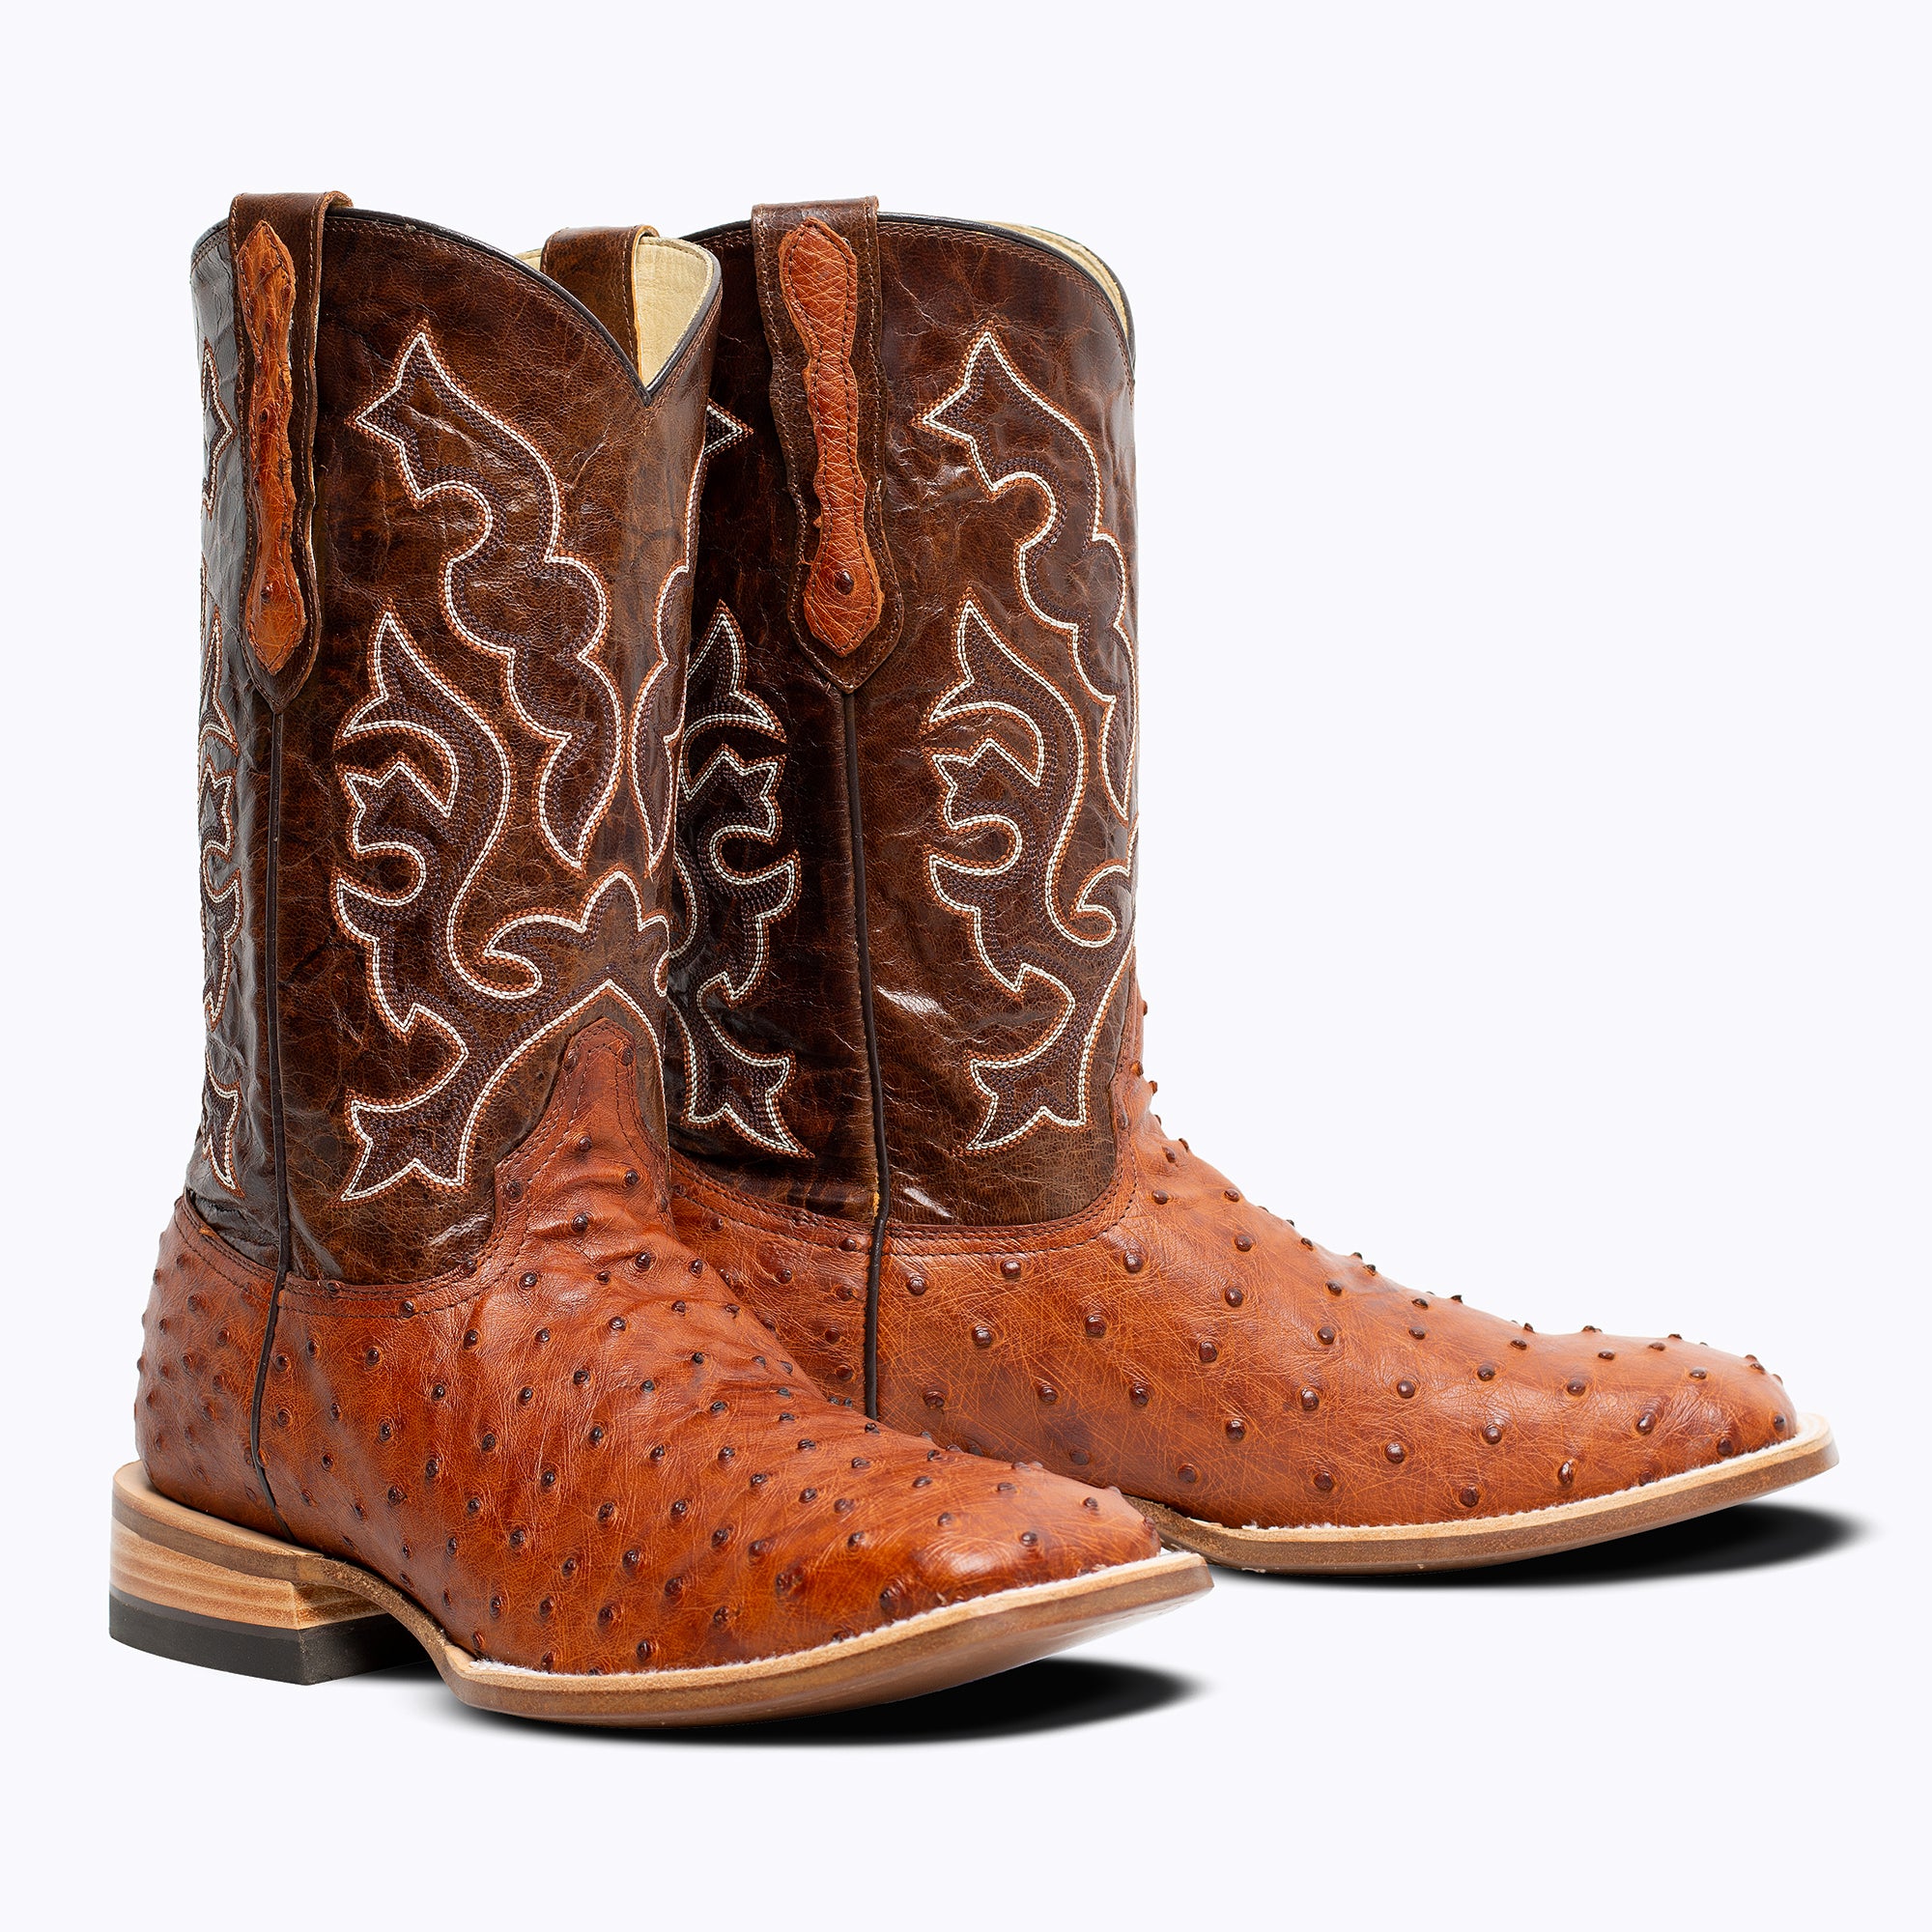 Jackson - LaGrange edition Full Quill Ostrich Boot - Capitan Boots